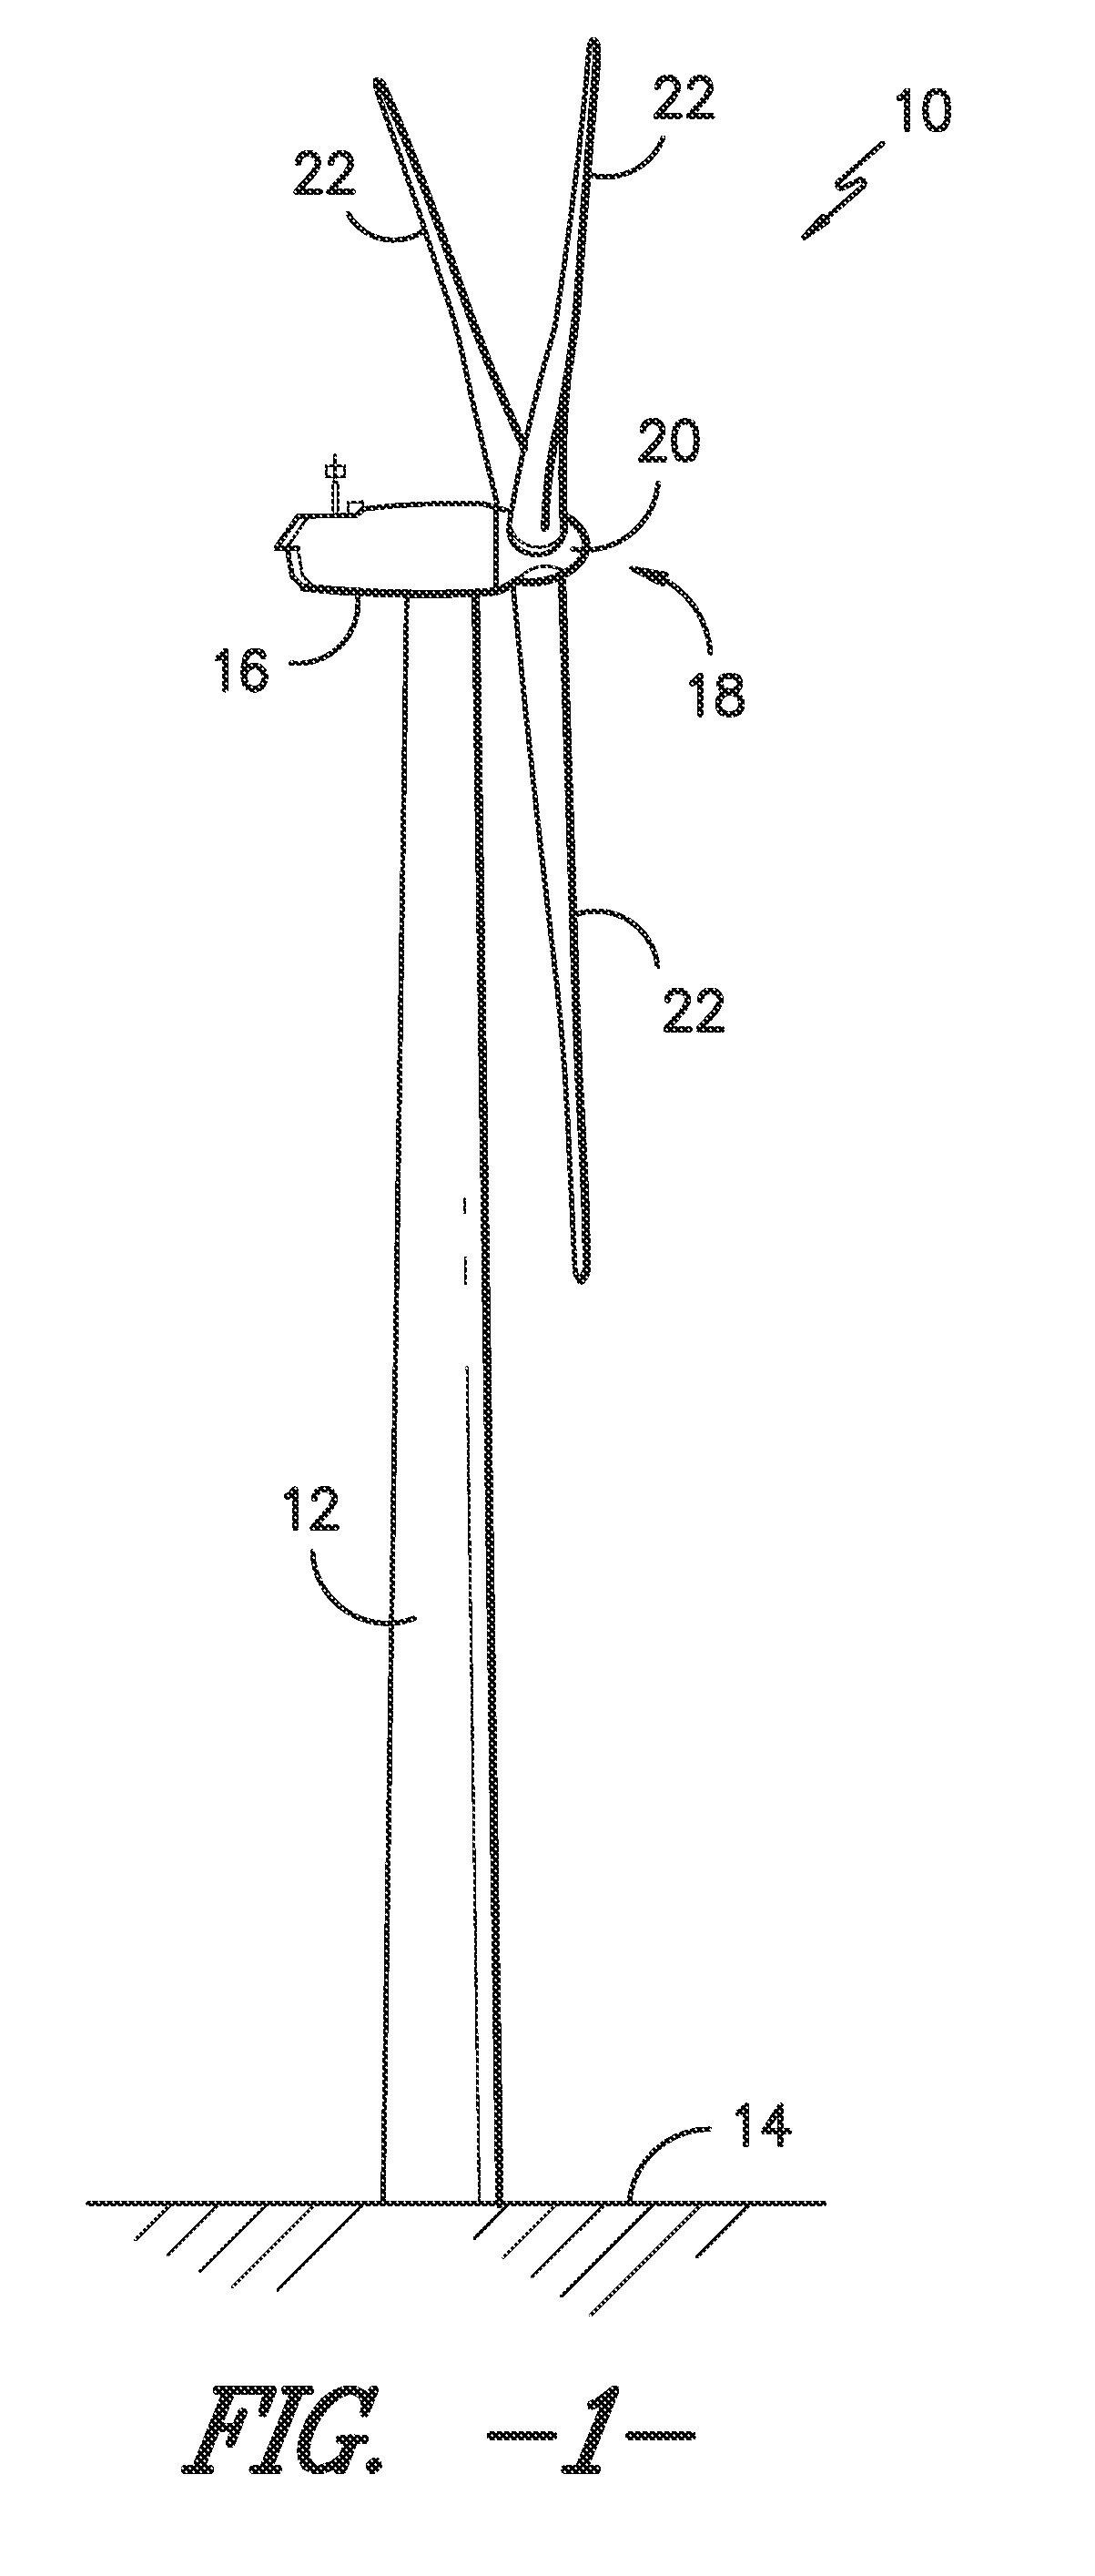 System and method for controlling a power generation system based on a detected islanding event